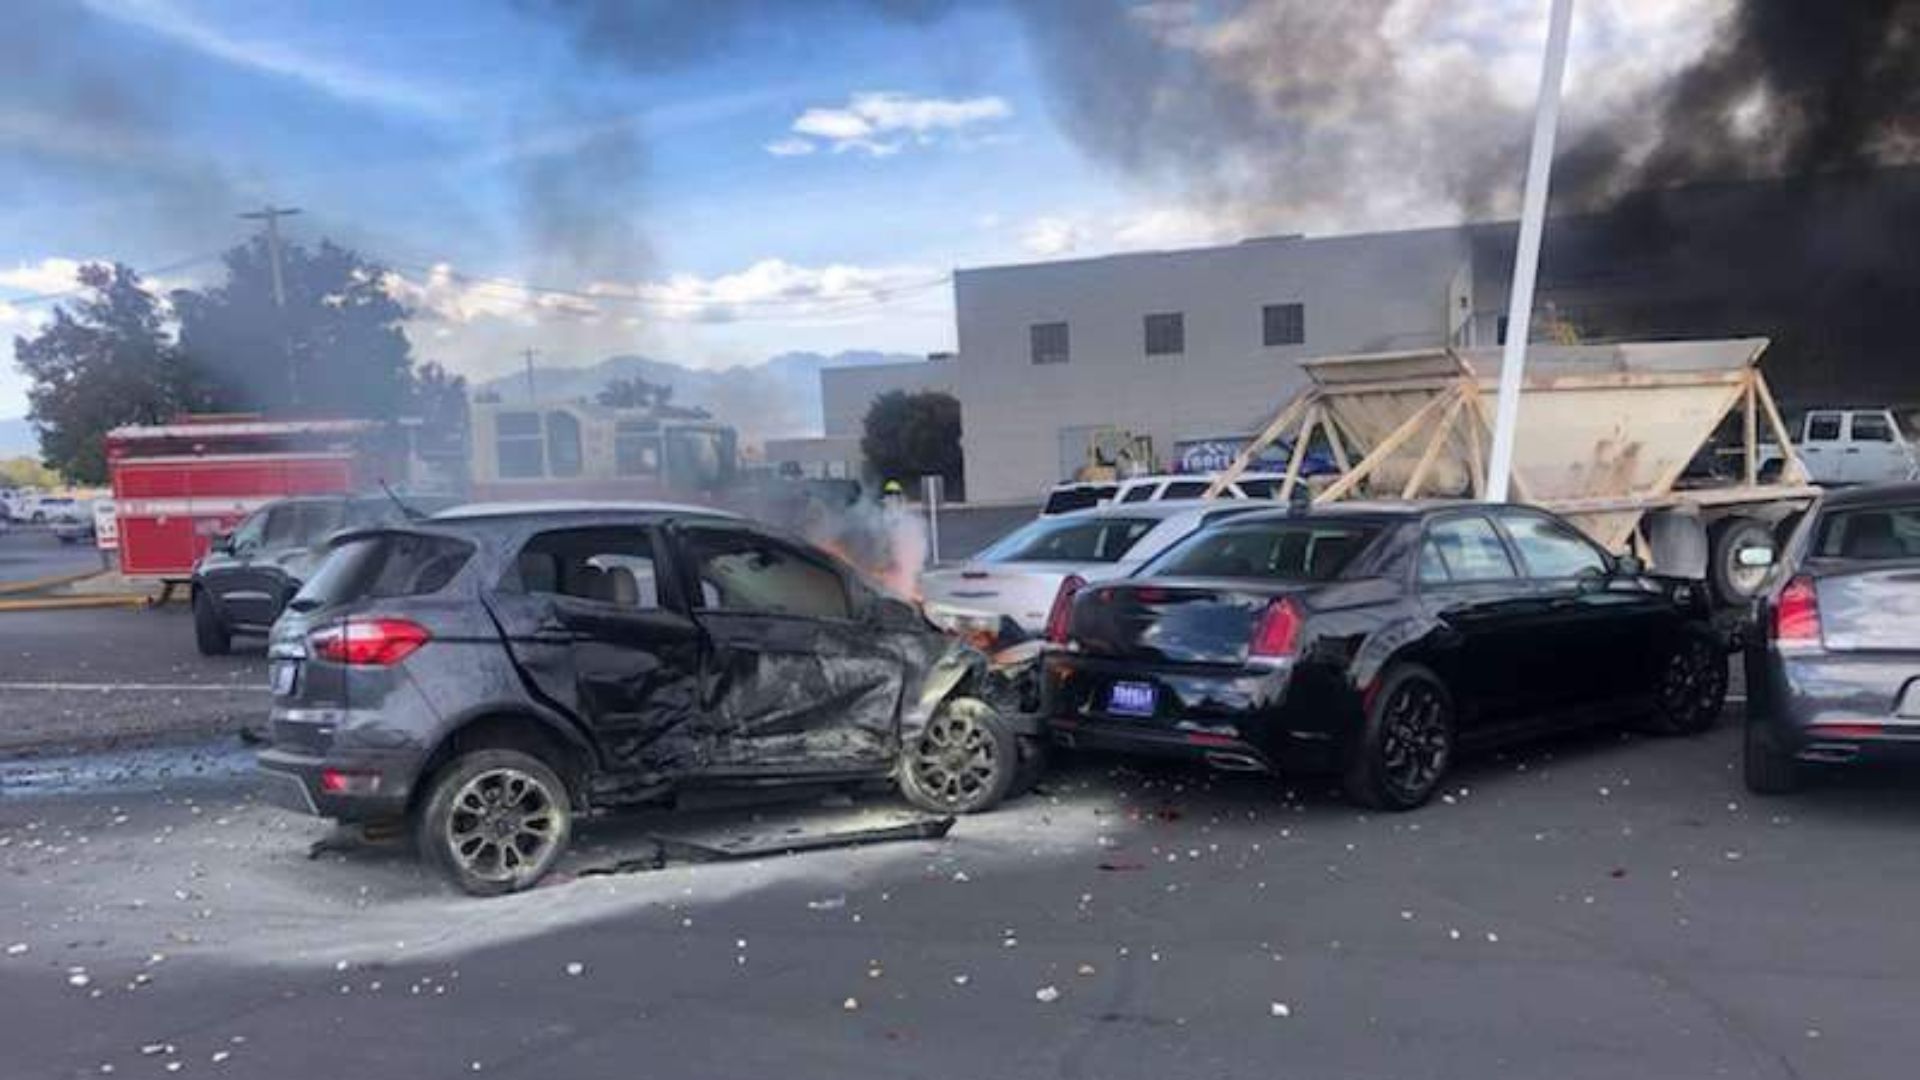 27 vehicles damaged in fiery semi-truck crash at Tooele car